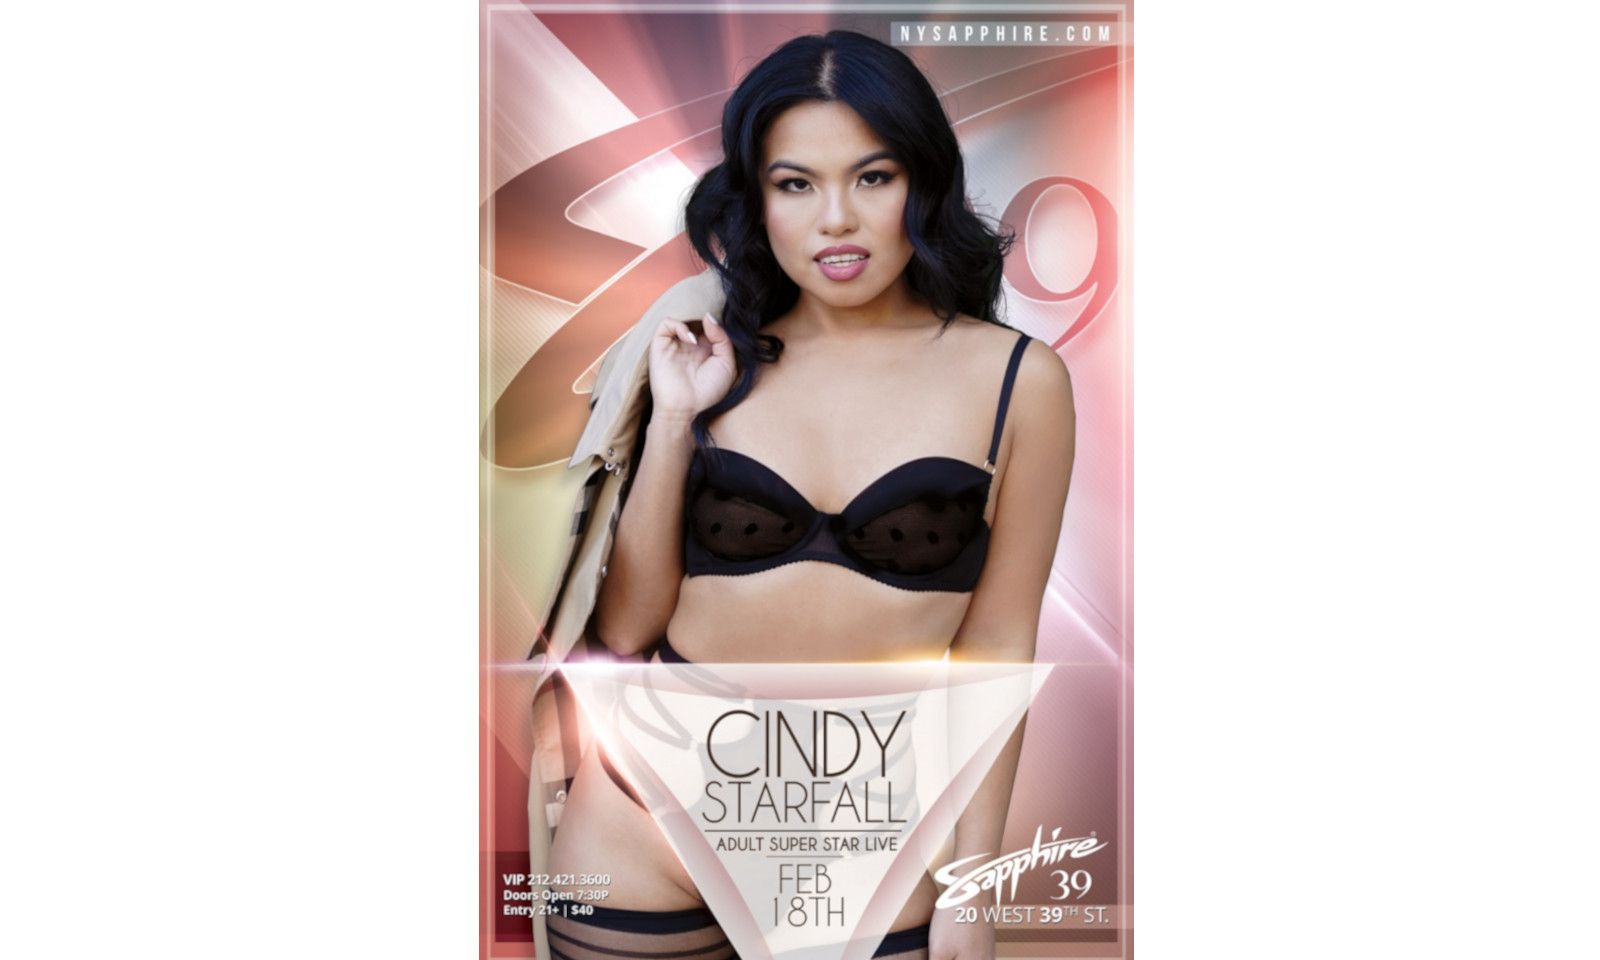 Cindy Starfall to Feature at New York's Sapphire 39